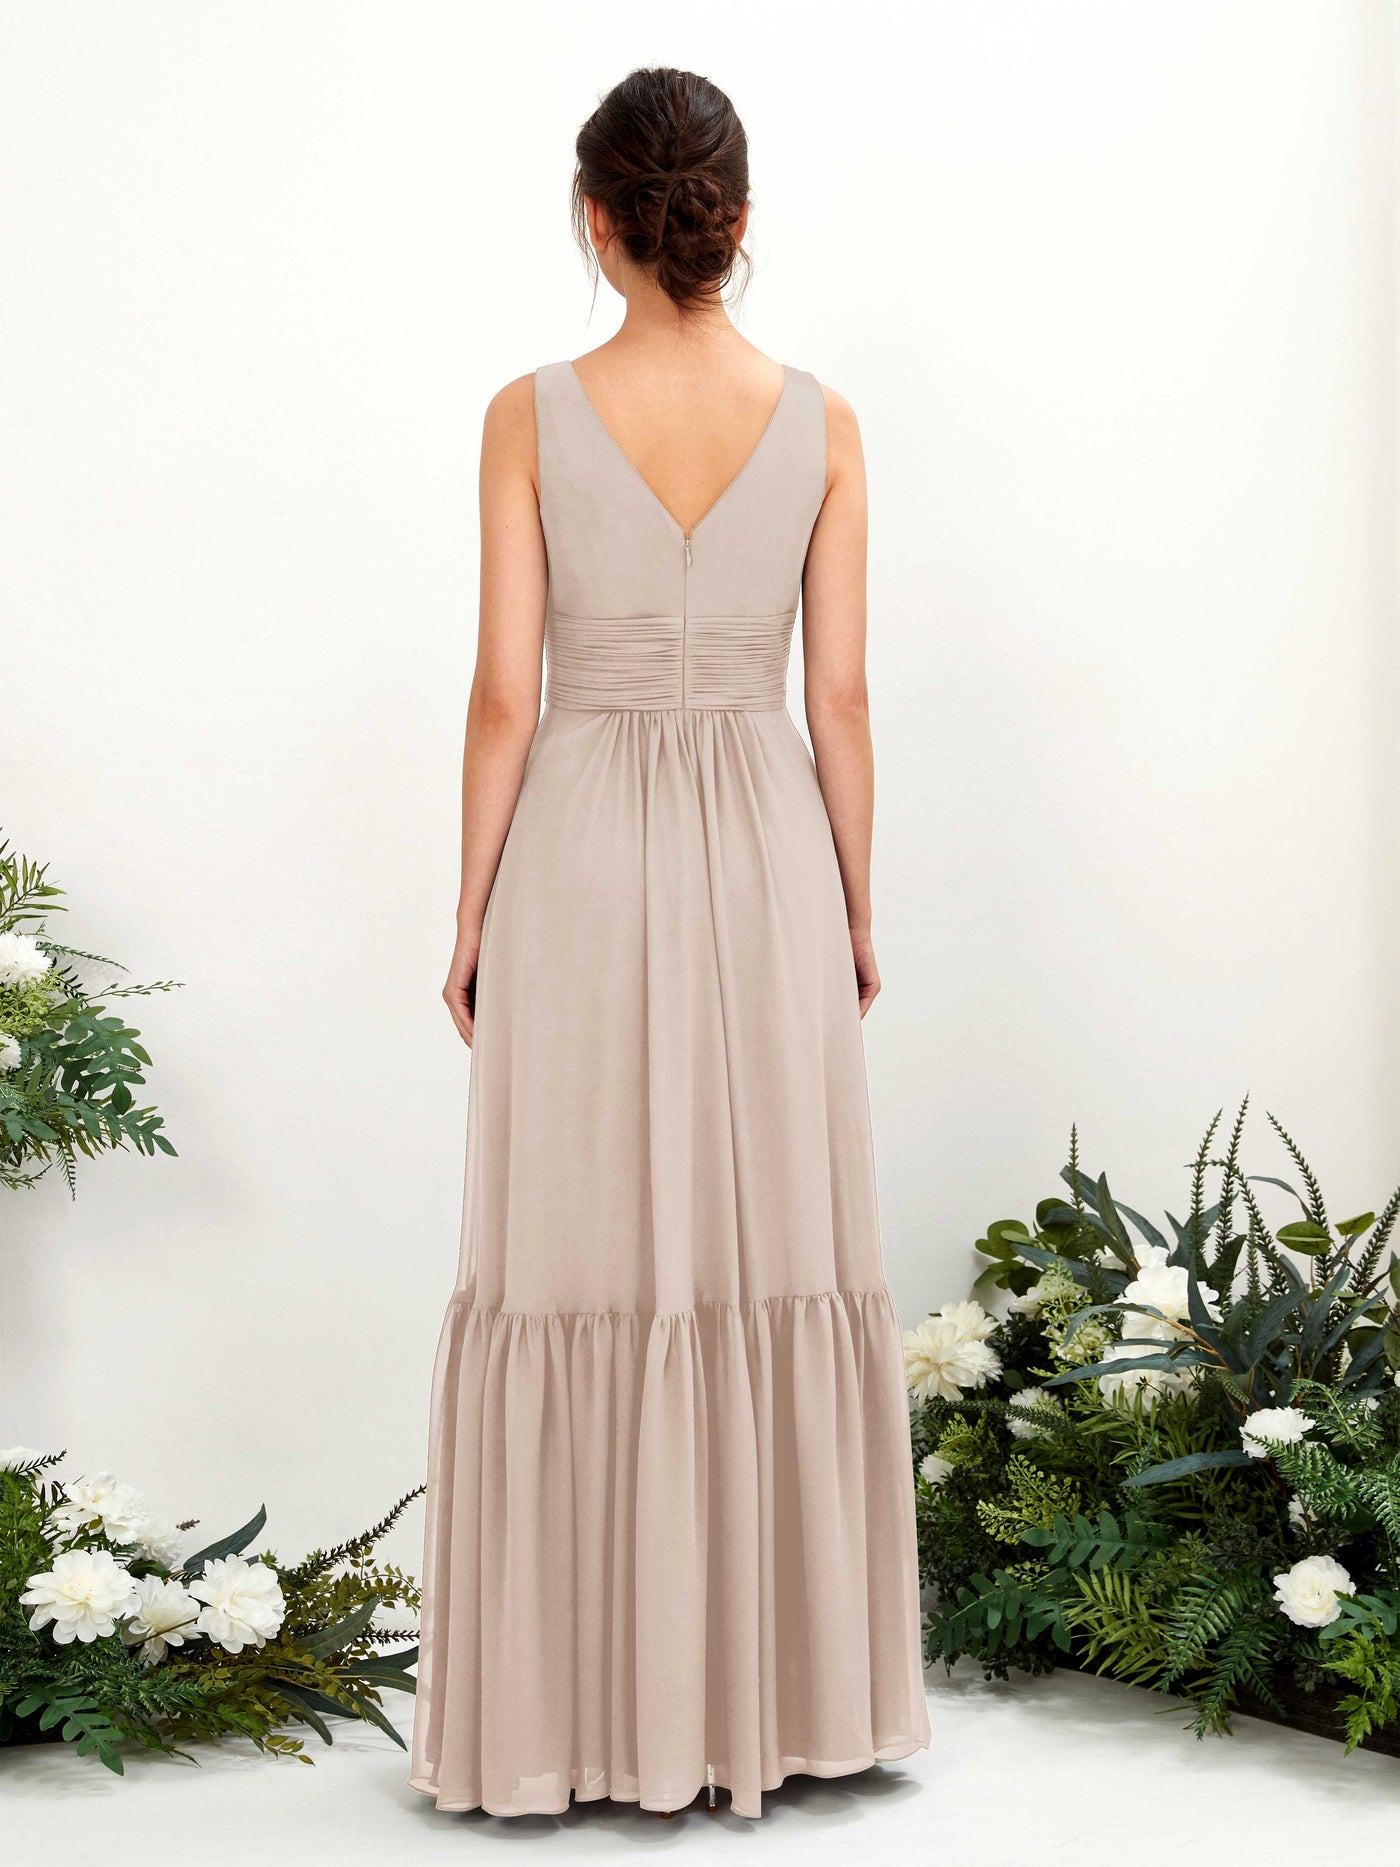 Champagne Bridesmaid Dresses Bridesmaid Dress A-line Chiffon Straps Full Length Sleeveless Wedding Party Dress (80223716)#color_champagne